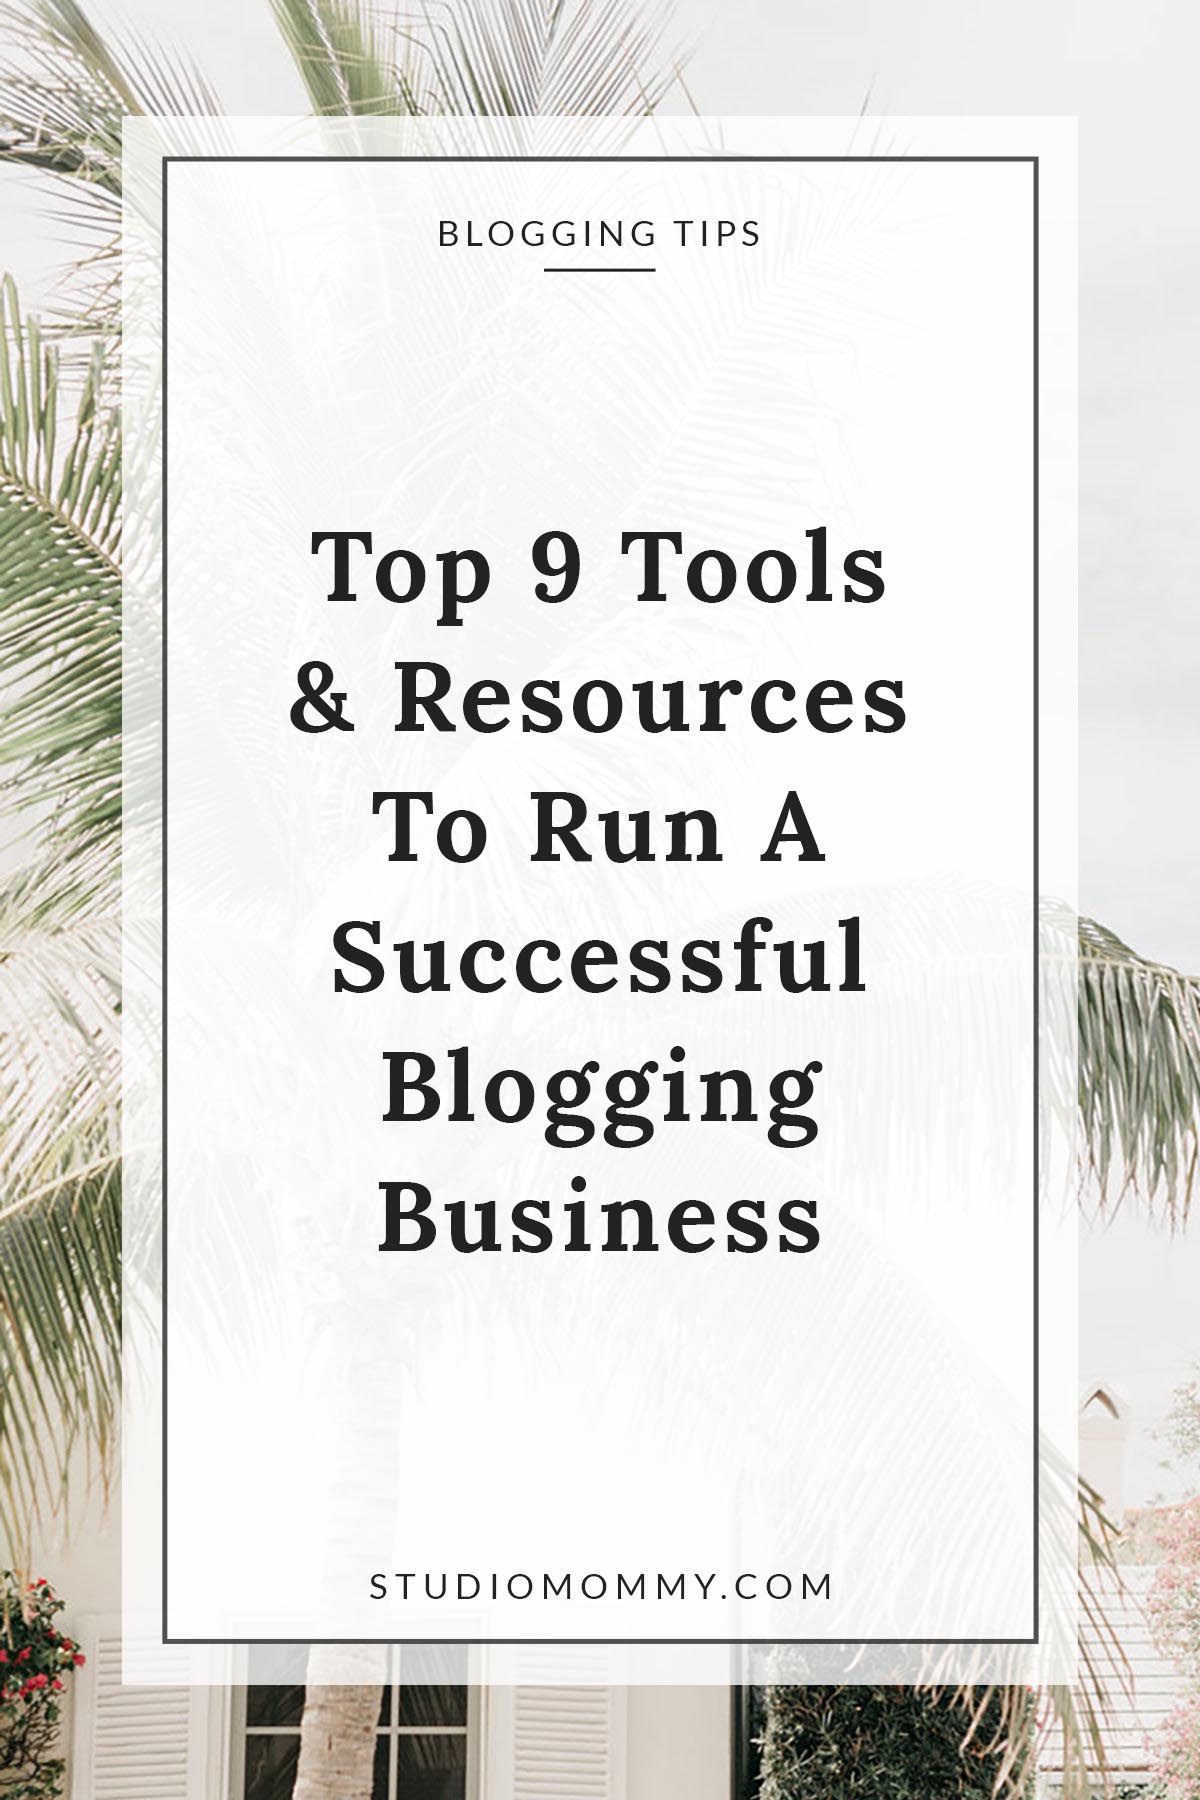 9 Tools & Resources to Run a Successful Business